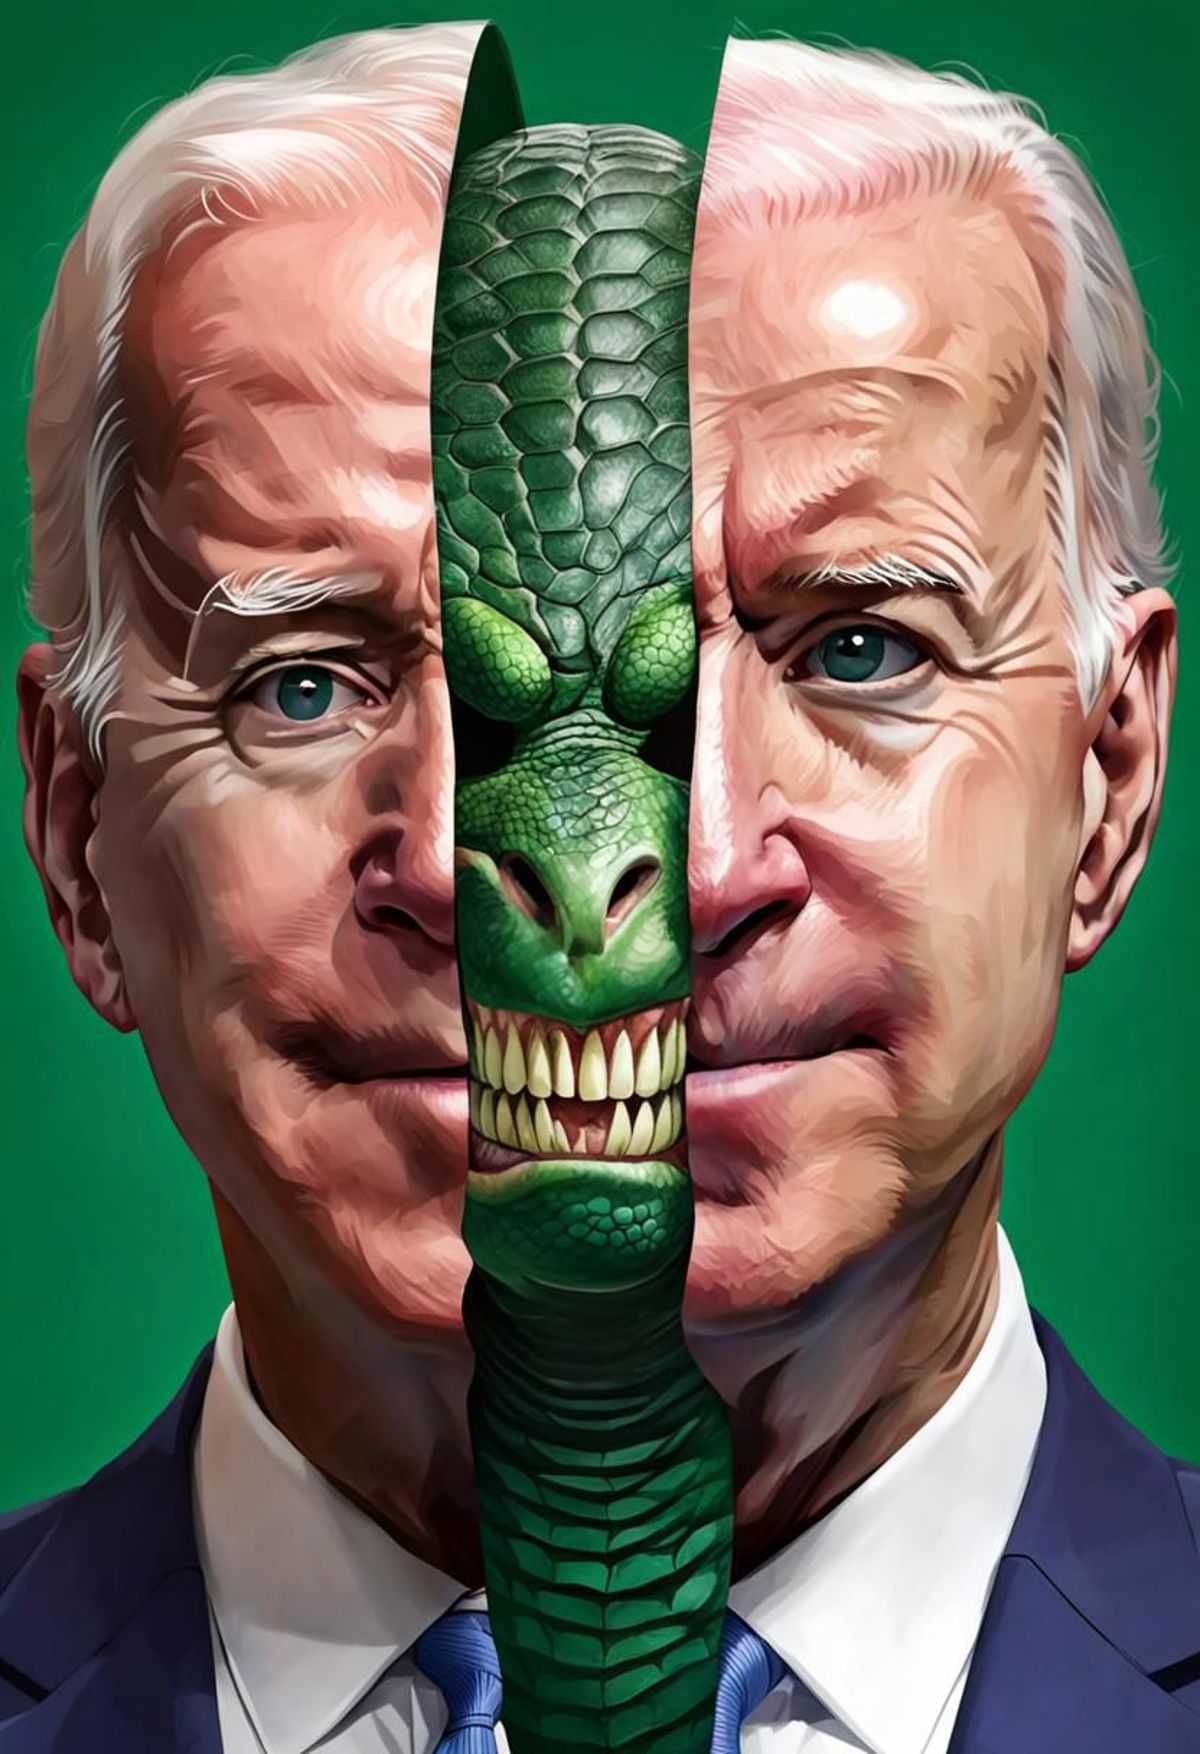 Biden's face with a snake and a dragon.